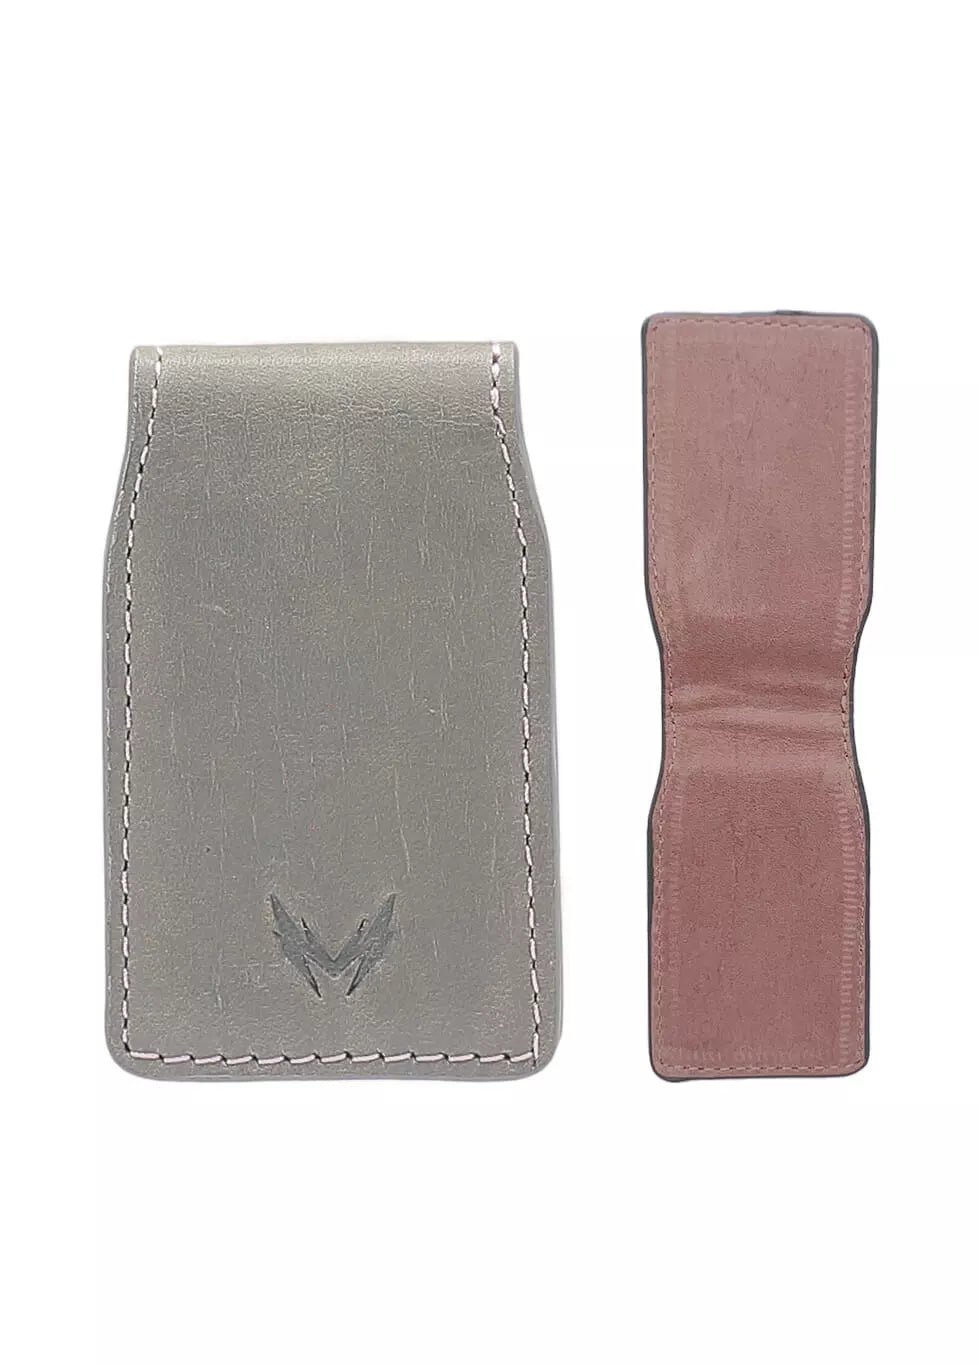 Stone Wall leather magnetic money clip